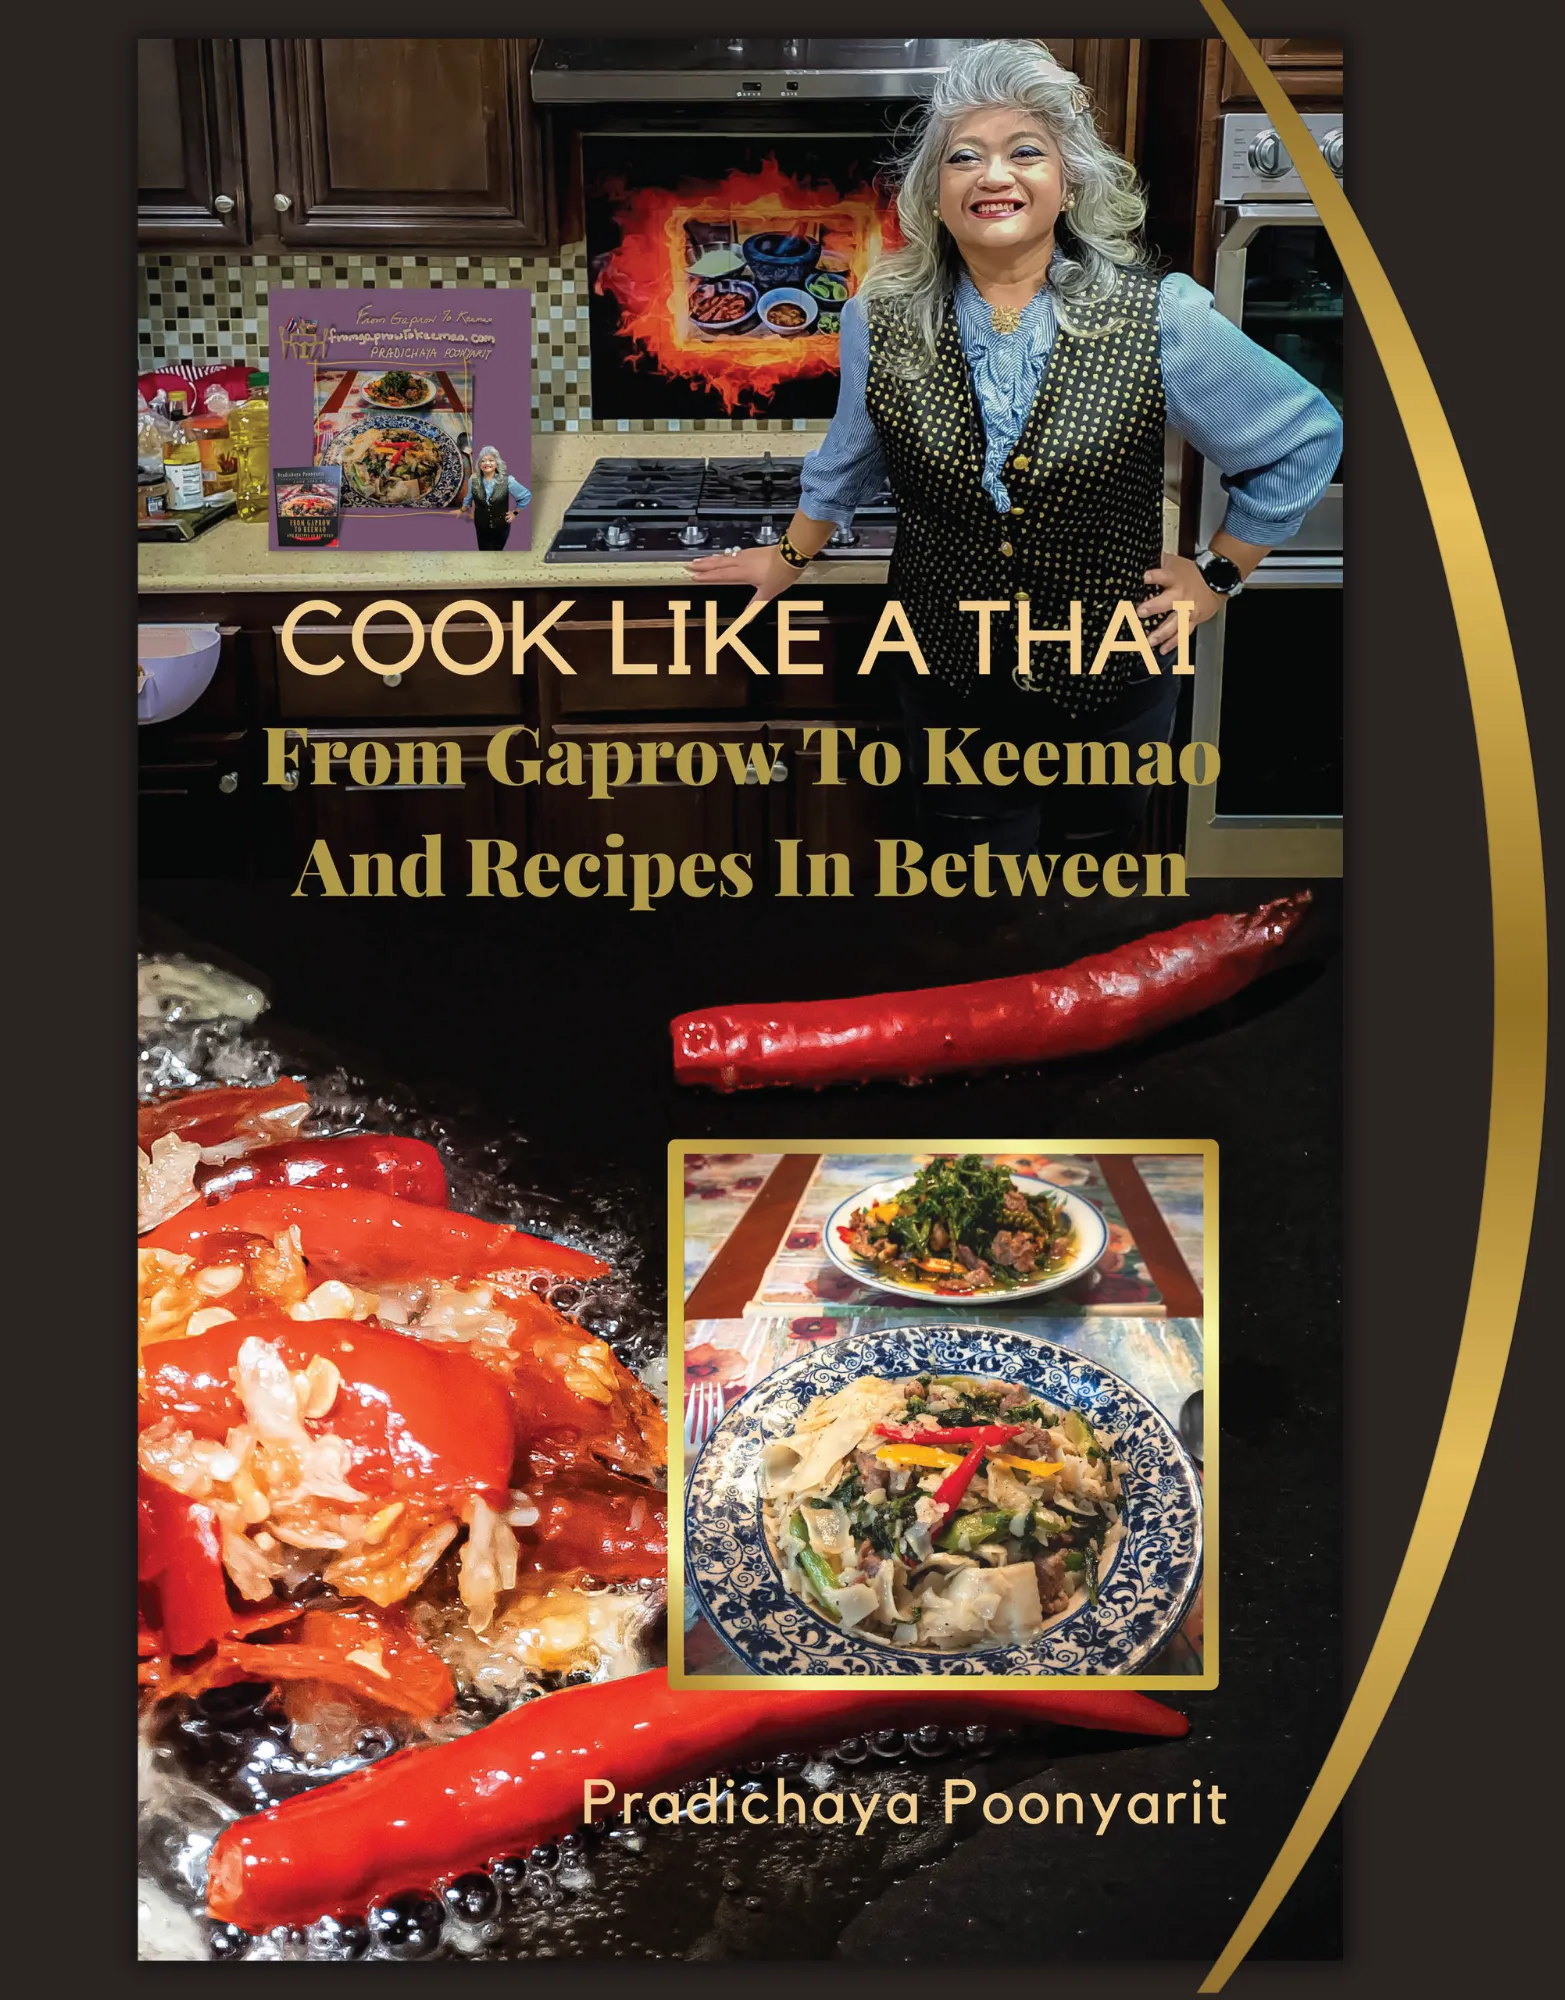 E Edition From Gaprow To Keemao And Recipes In Between-an update from the print version- a comprehensive guide that will get you cooking your favorite dishes more quickly. Get the e edition today